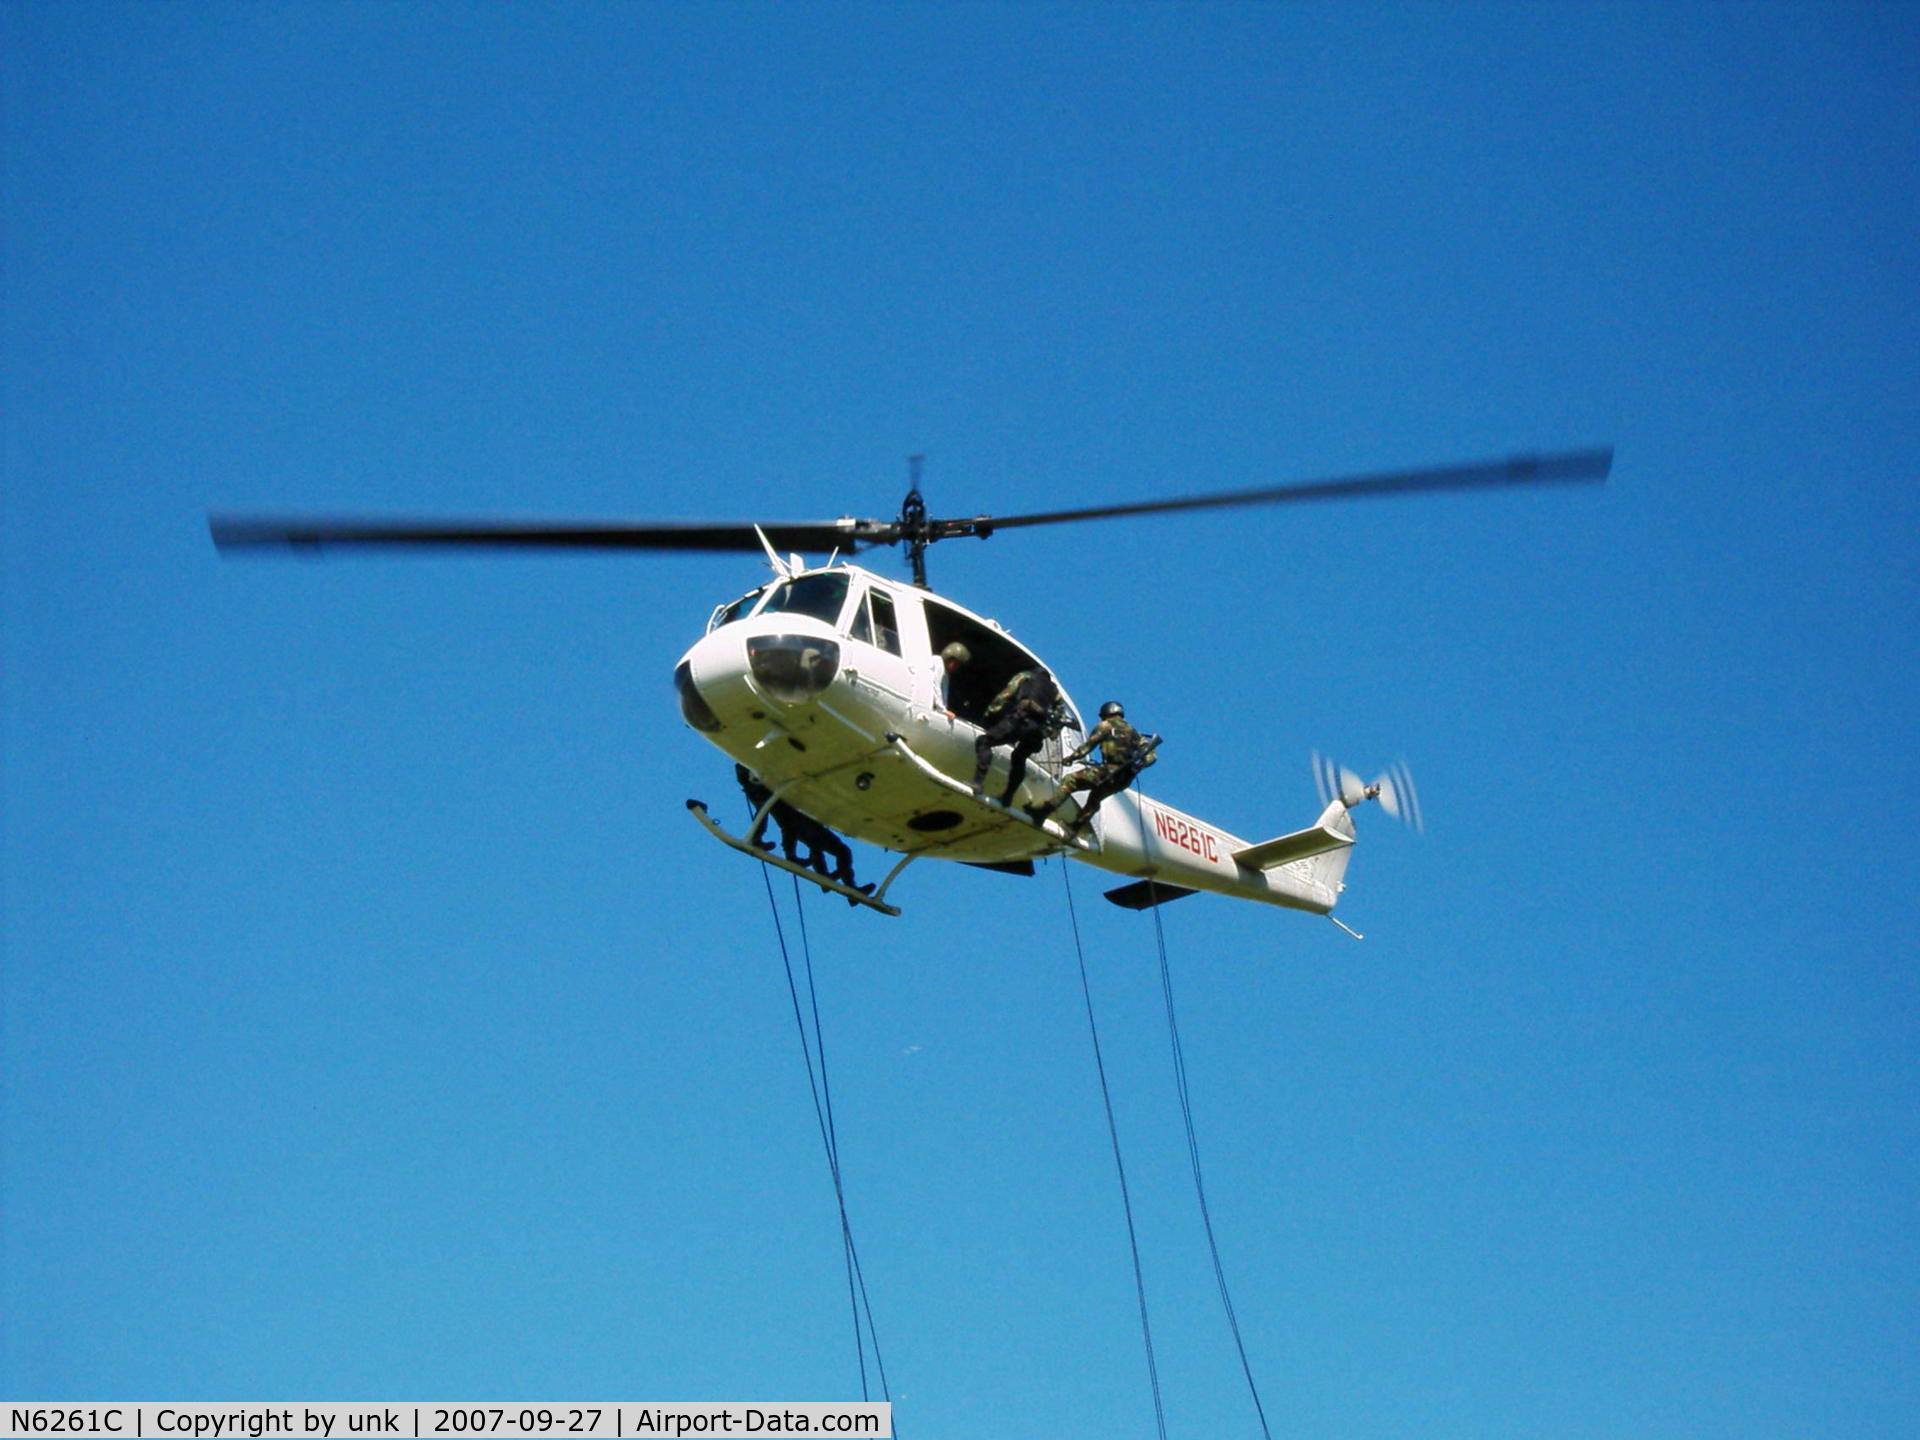 N6261C, 1968 Bell UH-1H Iroquois C/N 10451, Police repel naec assault